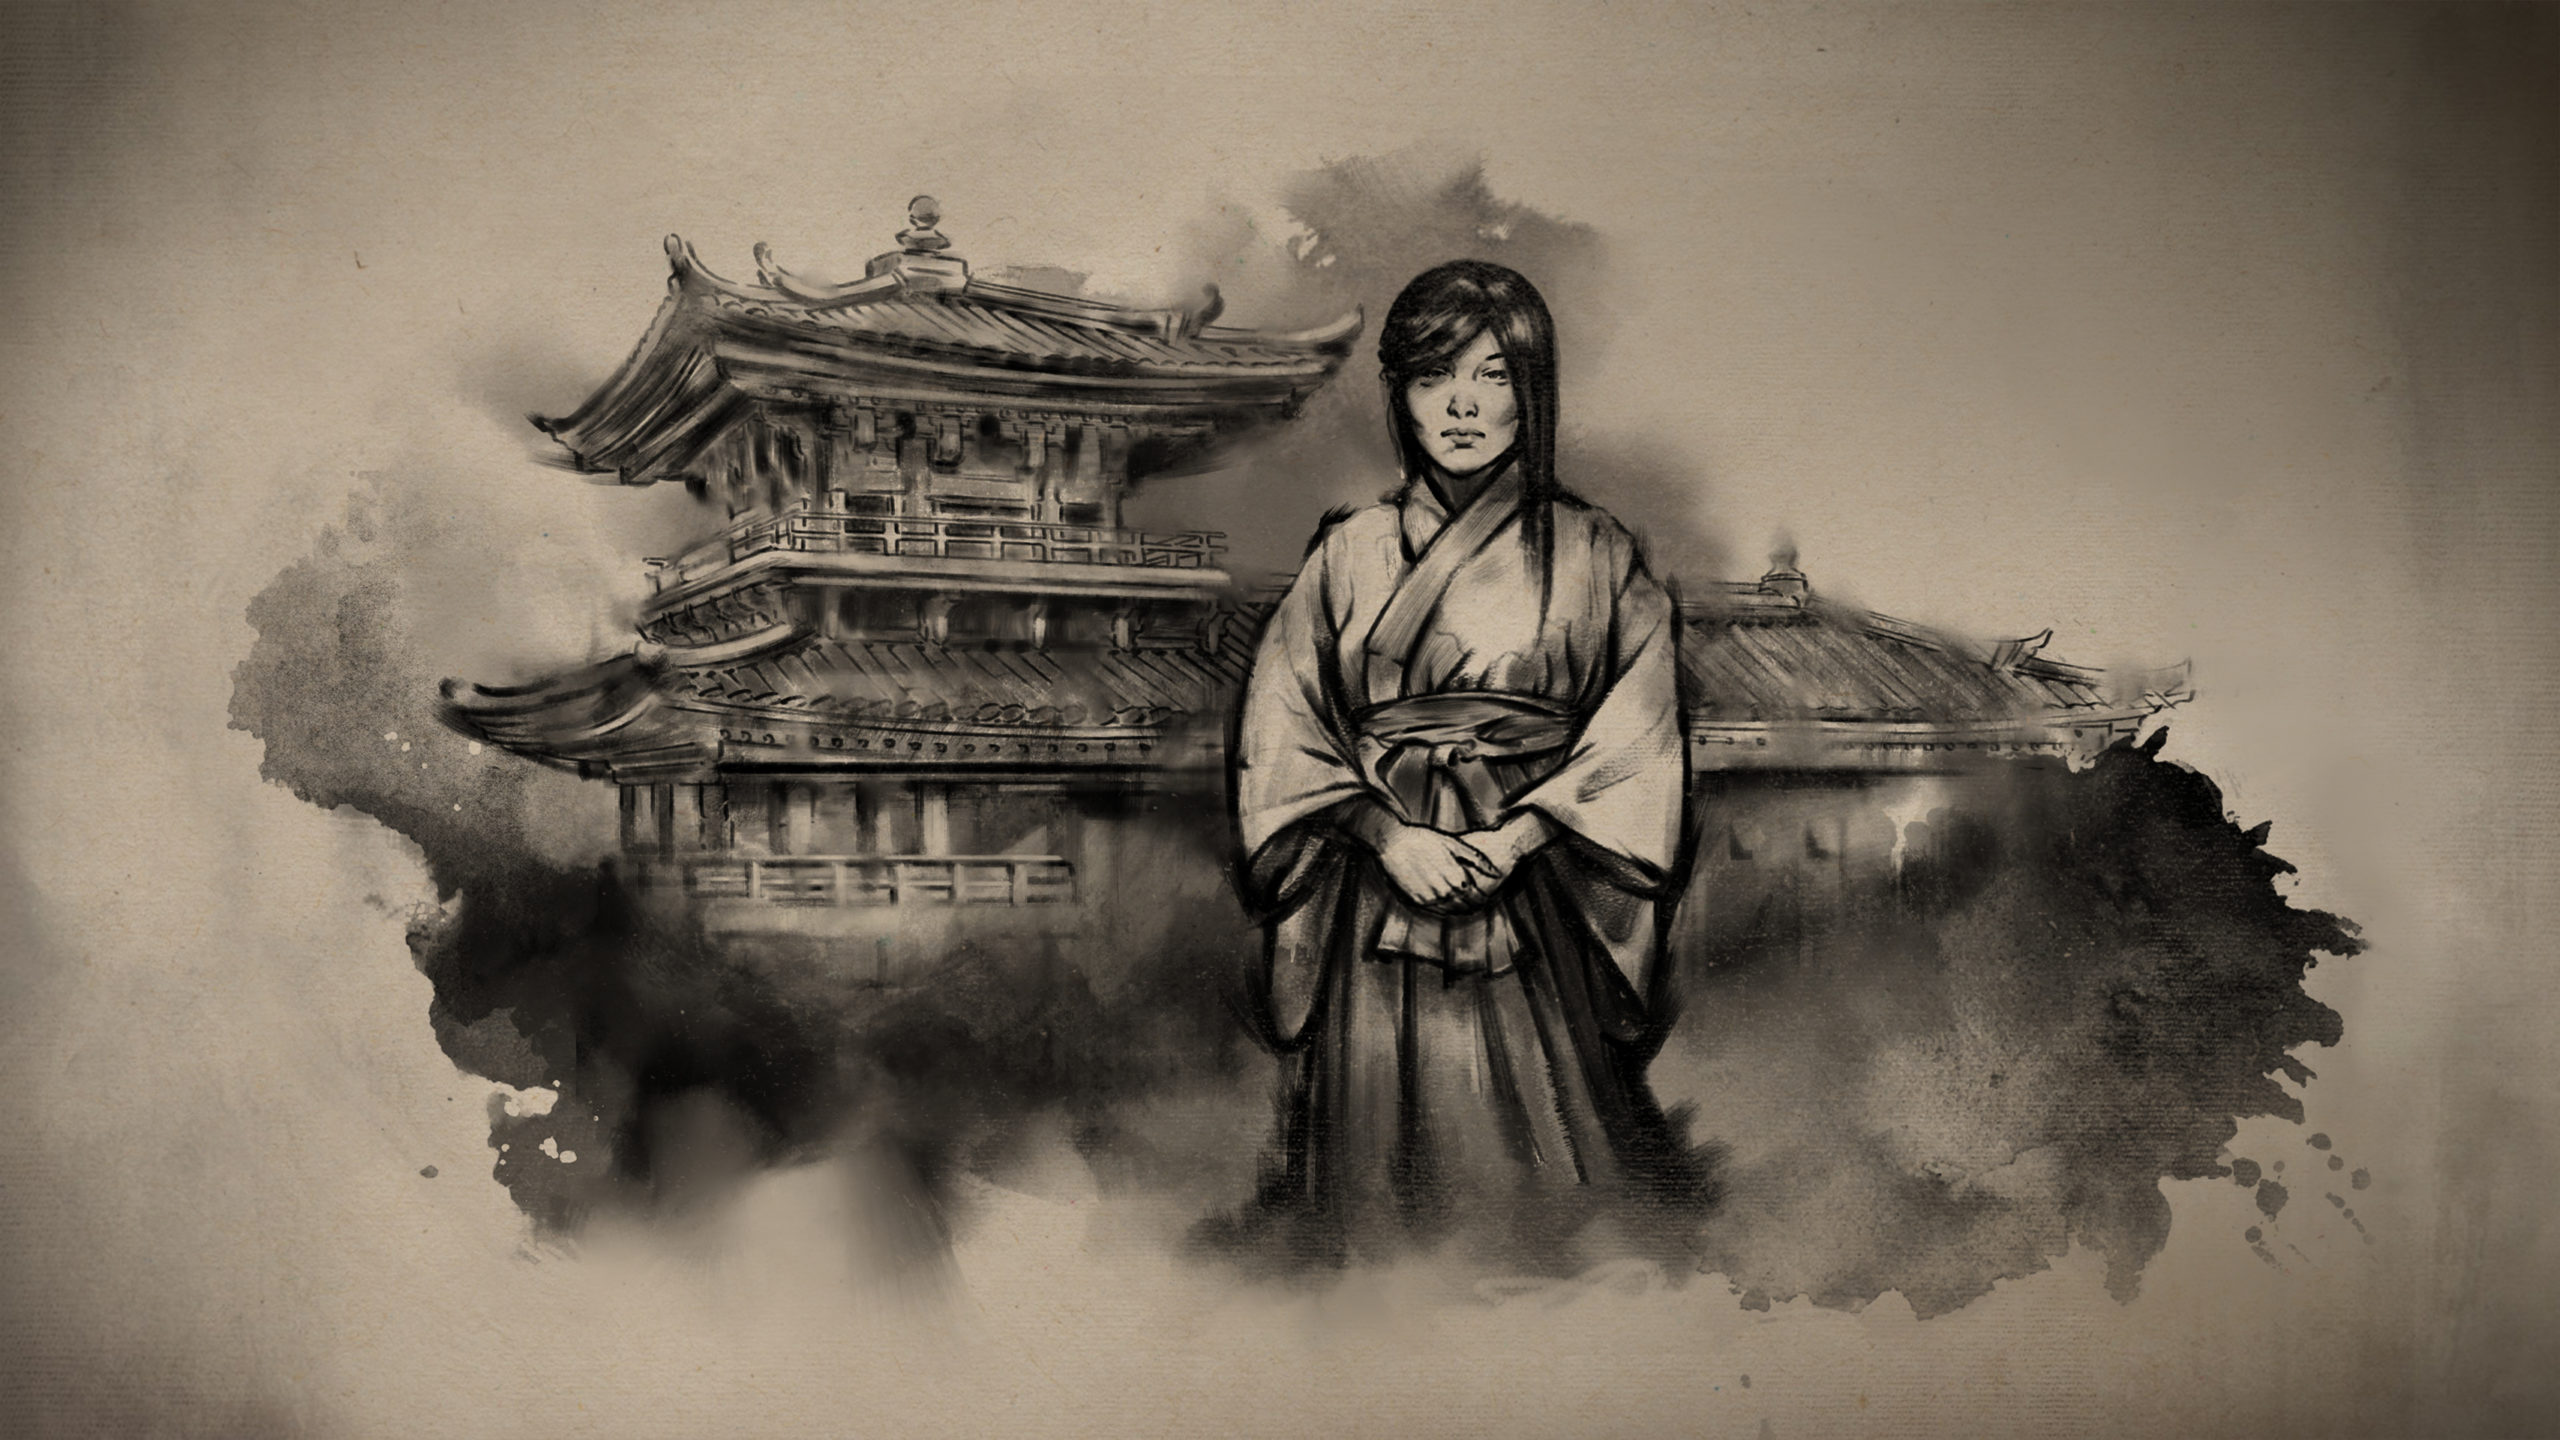 An ink style digital artwork of a woman in robes standing in front of a Japanese style temple or building.